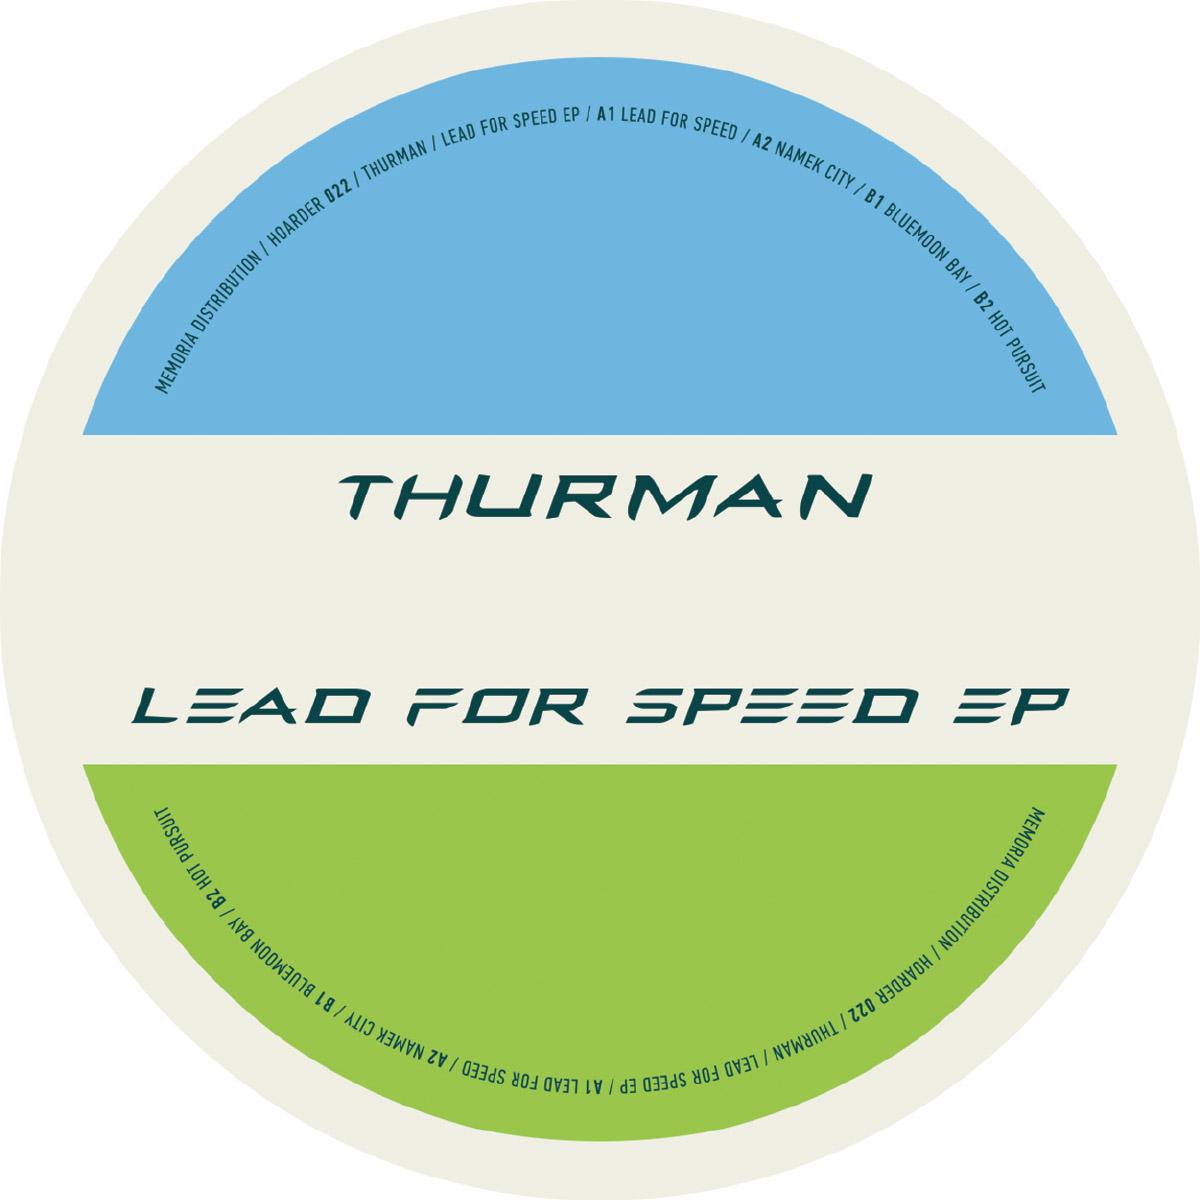 LEAD FOR SPEED EP